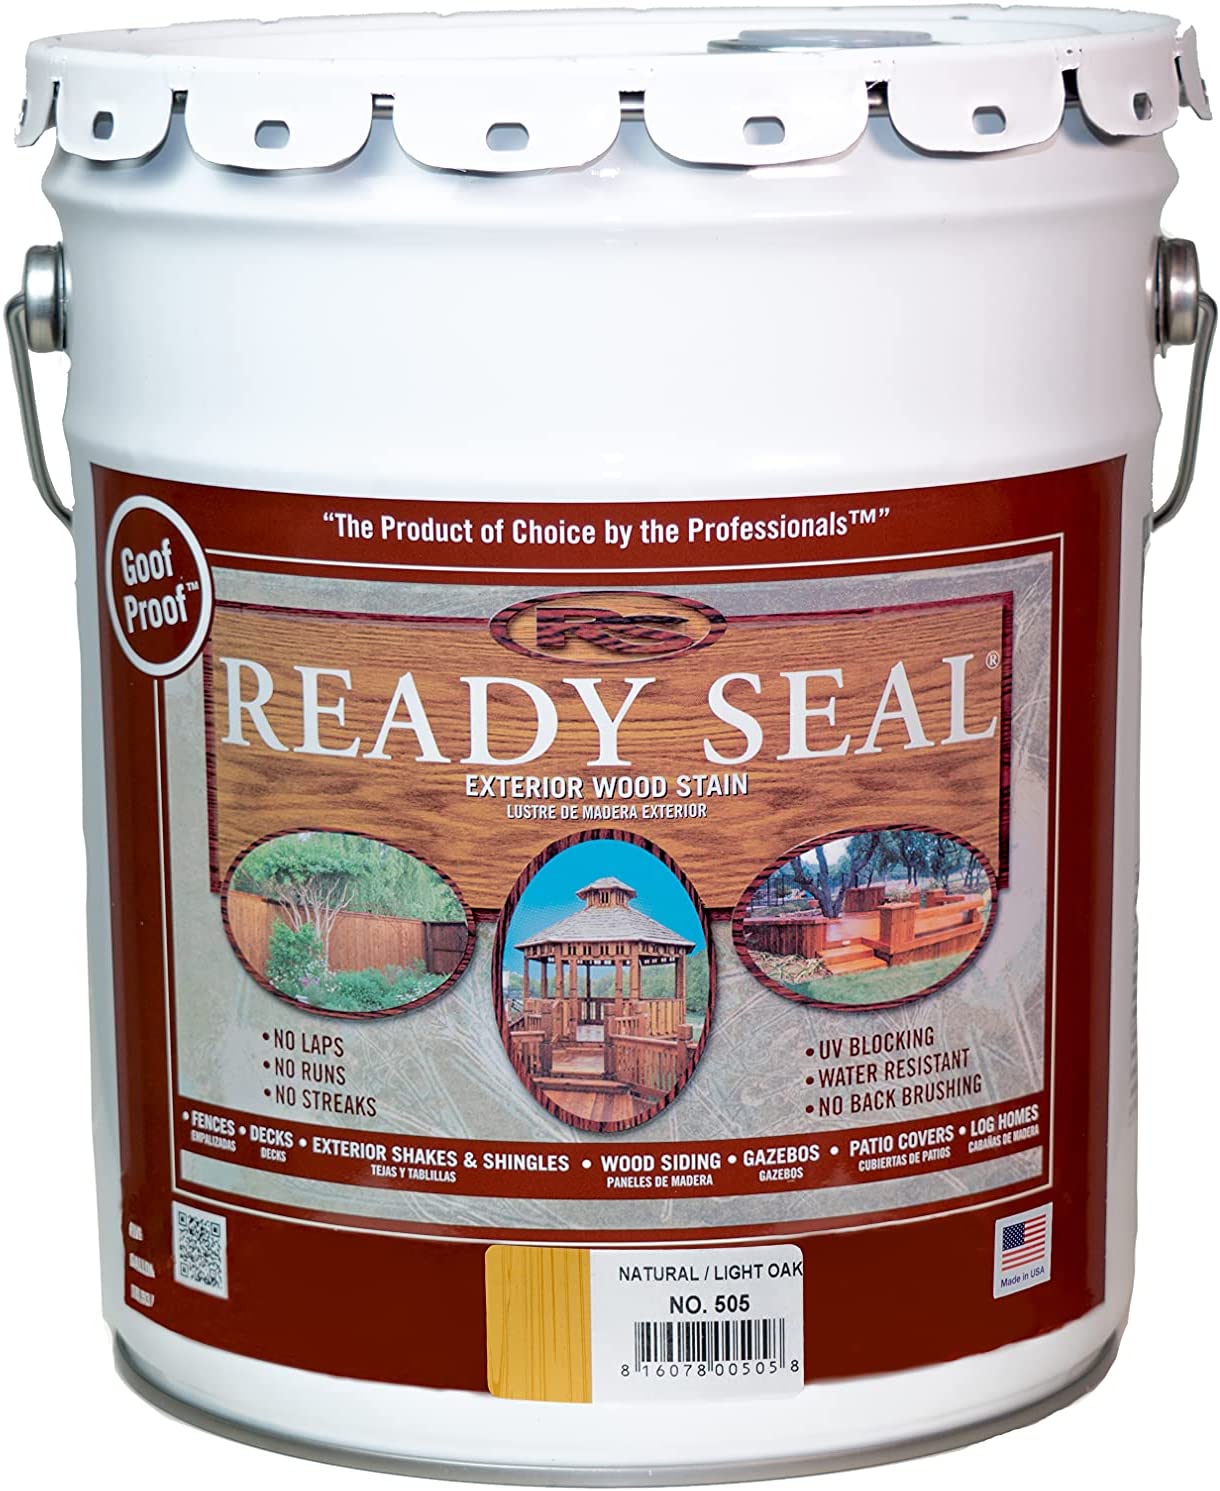 Ready Seal - Ready Wood Stain and Sealer - Natural Light Oak 505 - 5 Gallon #READY-SEAL-NATURAL-LIGHT-OAK-5GL